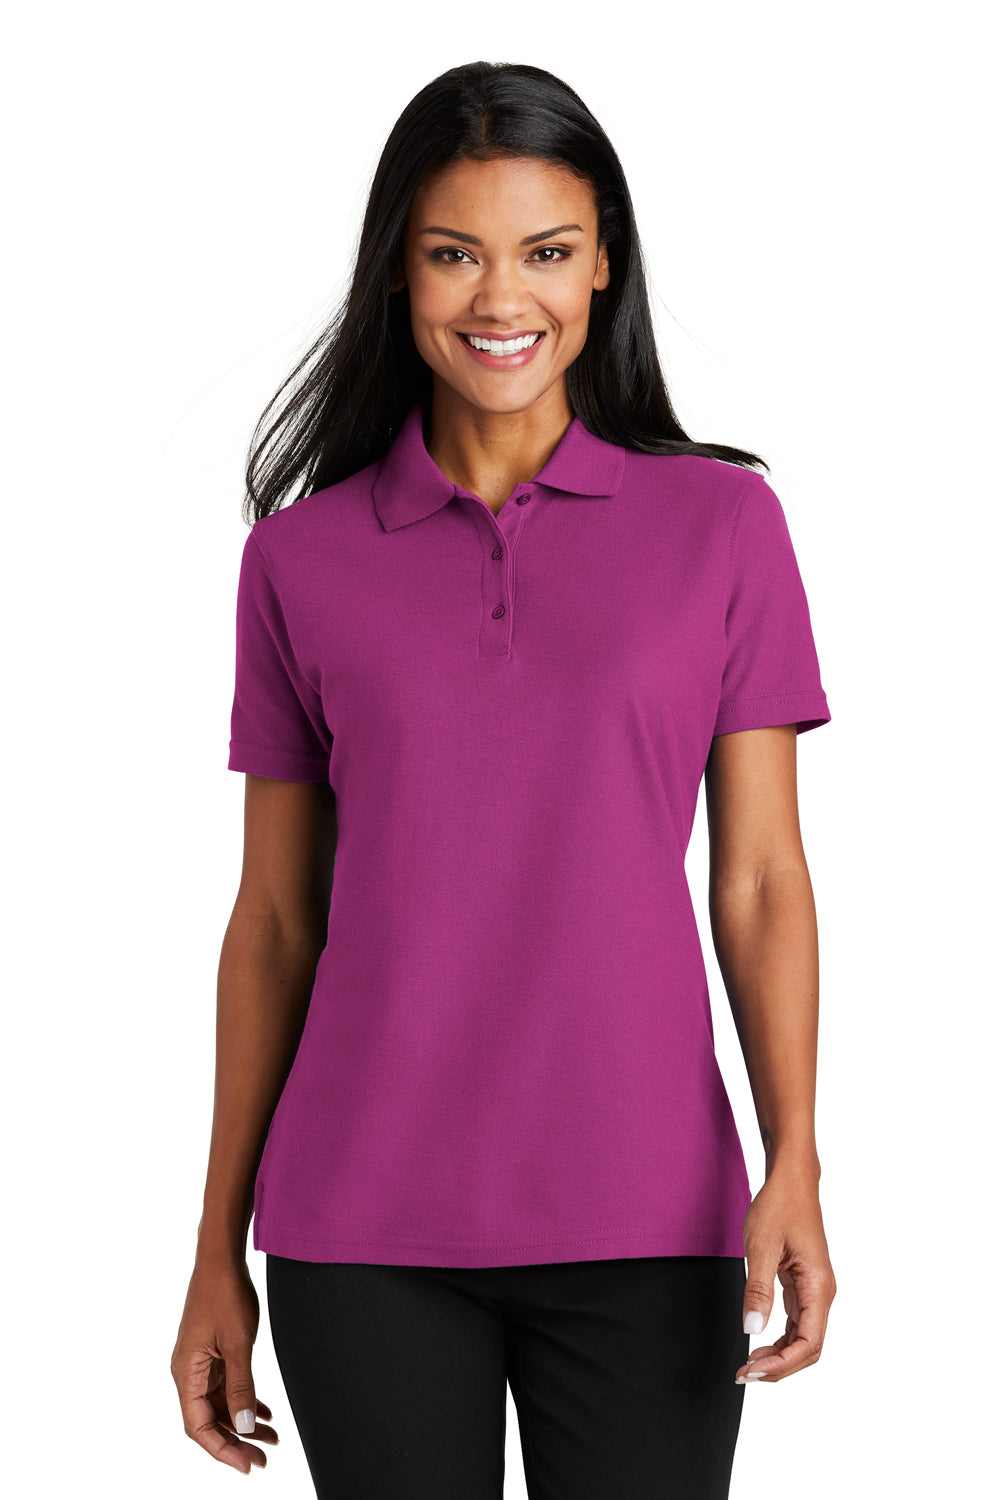 Port Authority L510 Womens Moisture Wicking Short Sleeve Polo Shirt Boysenberry Pink Front